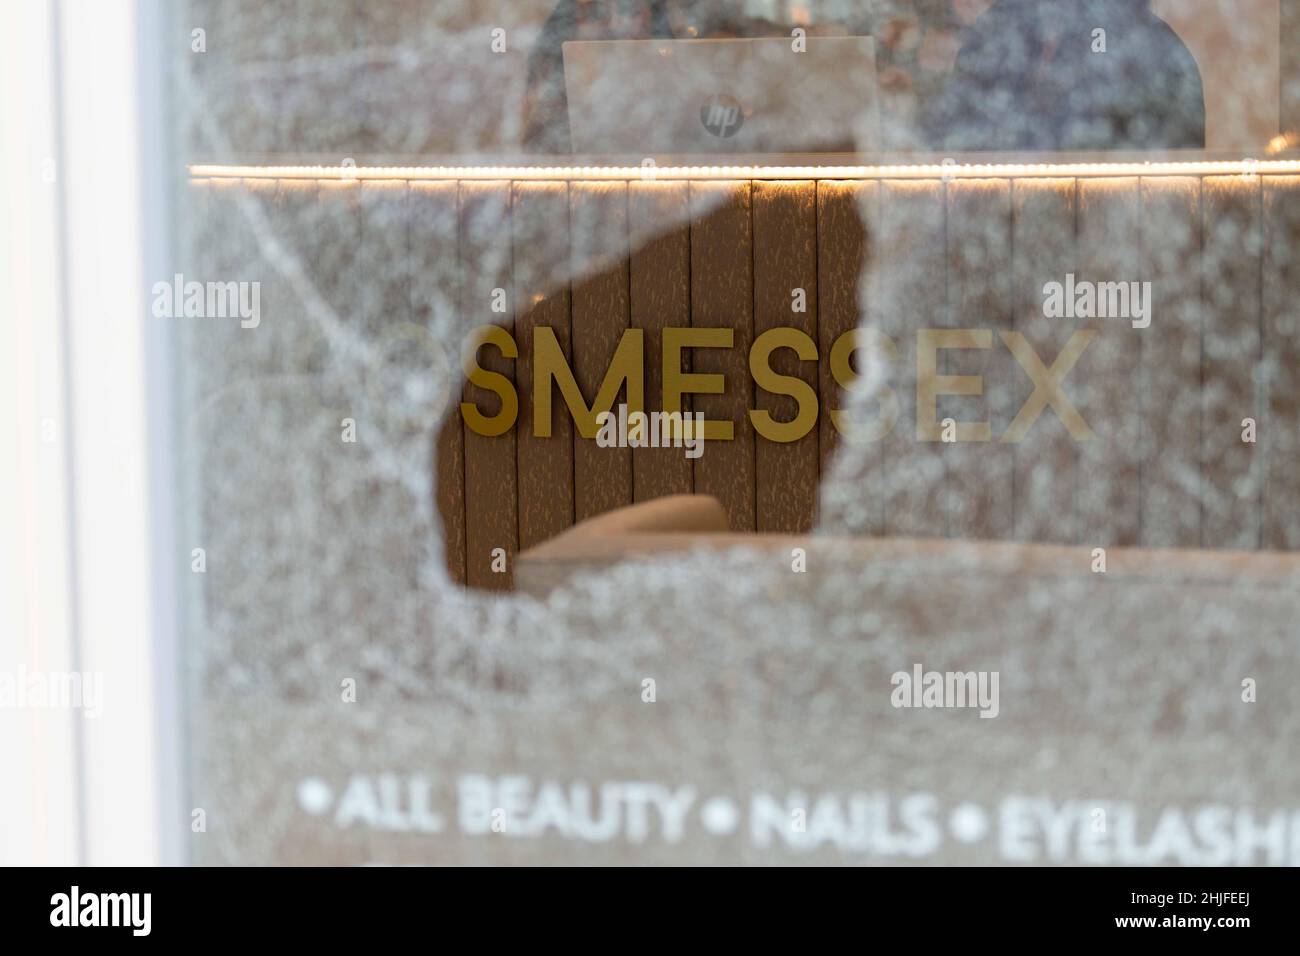 Brentwood, UK. 29th Jan, 2022. Brentwood Essex 29th Jan 2022 Essex police have reported a suspect with a hammer allegedly attacked the Cosmessex salon on Brentwood High Street, Essex. No arrests have been made. Credit: Ian Davidson/Alamy Live News Stock Photo